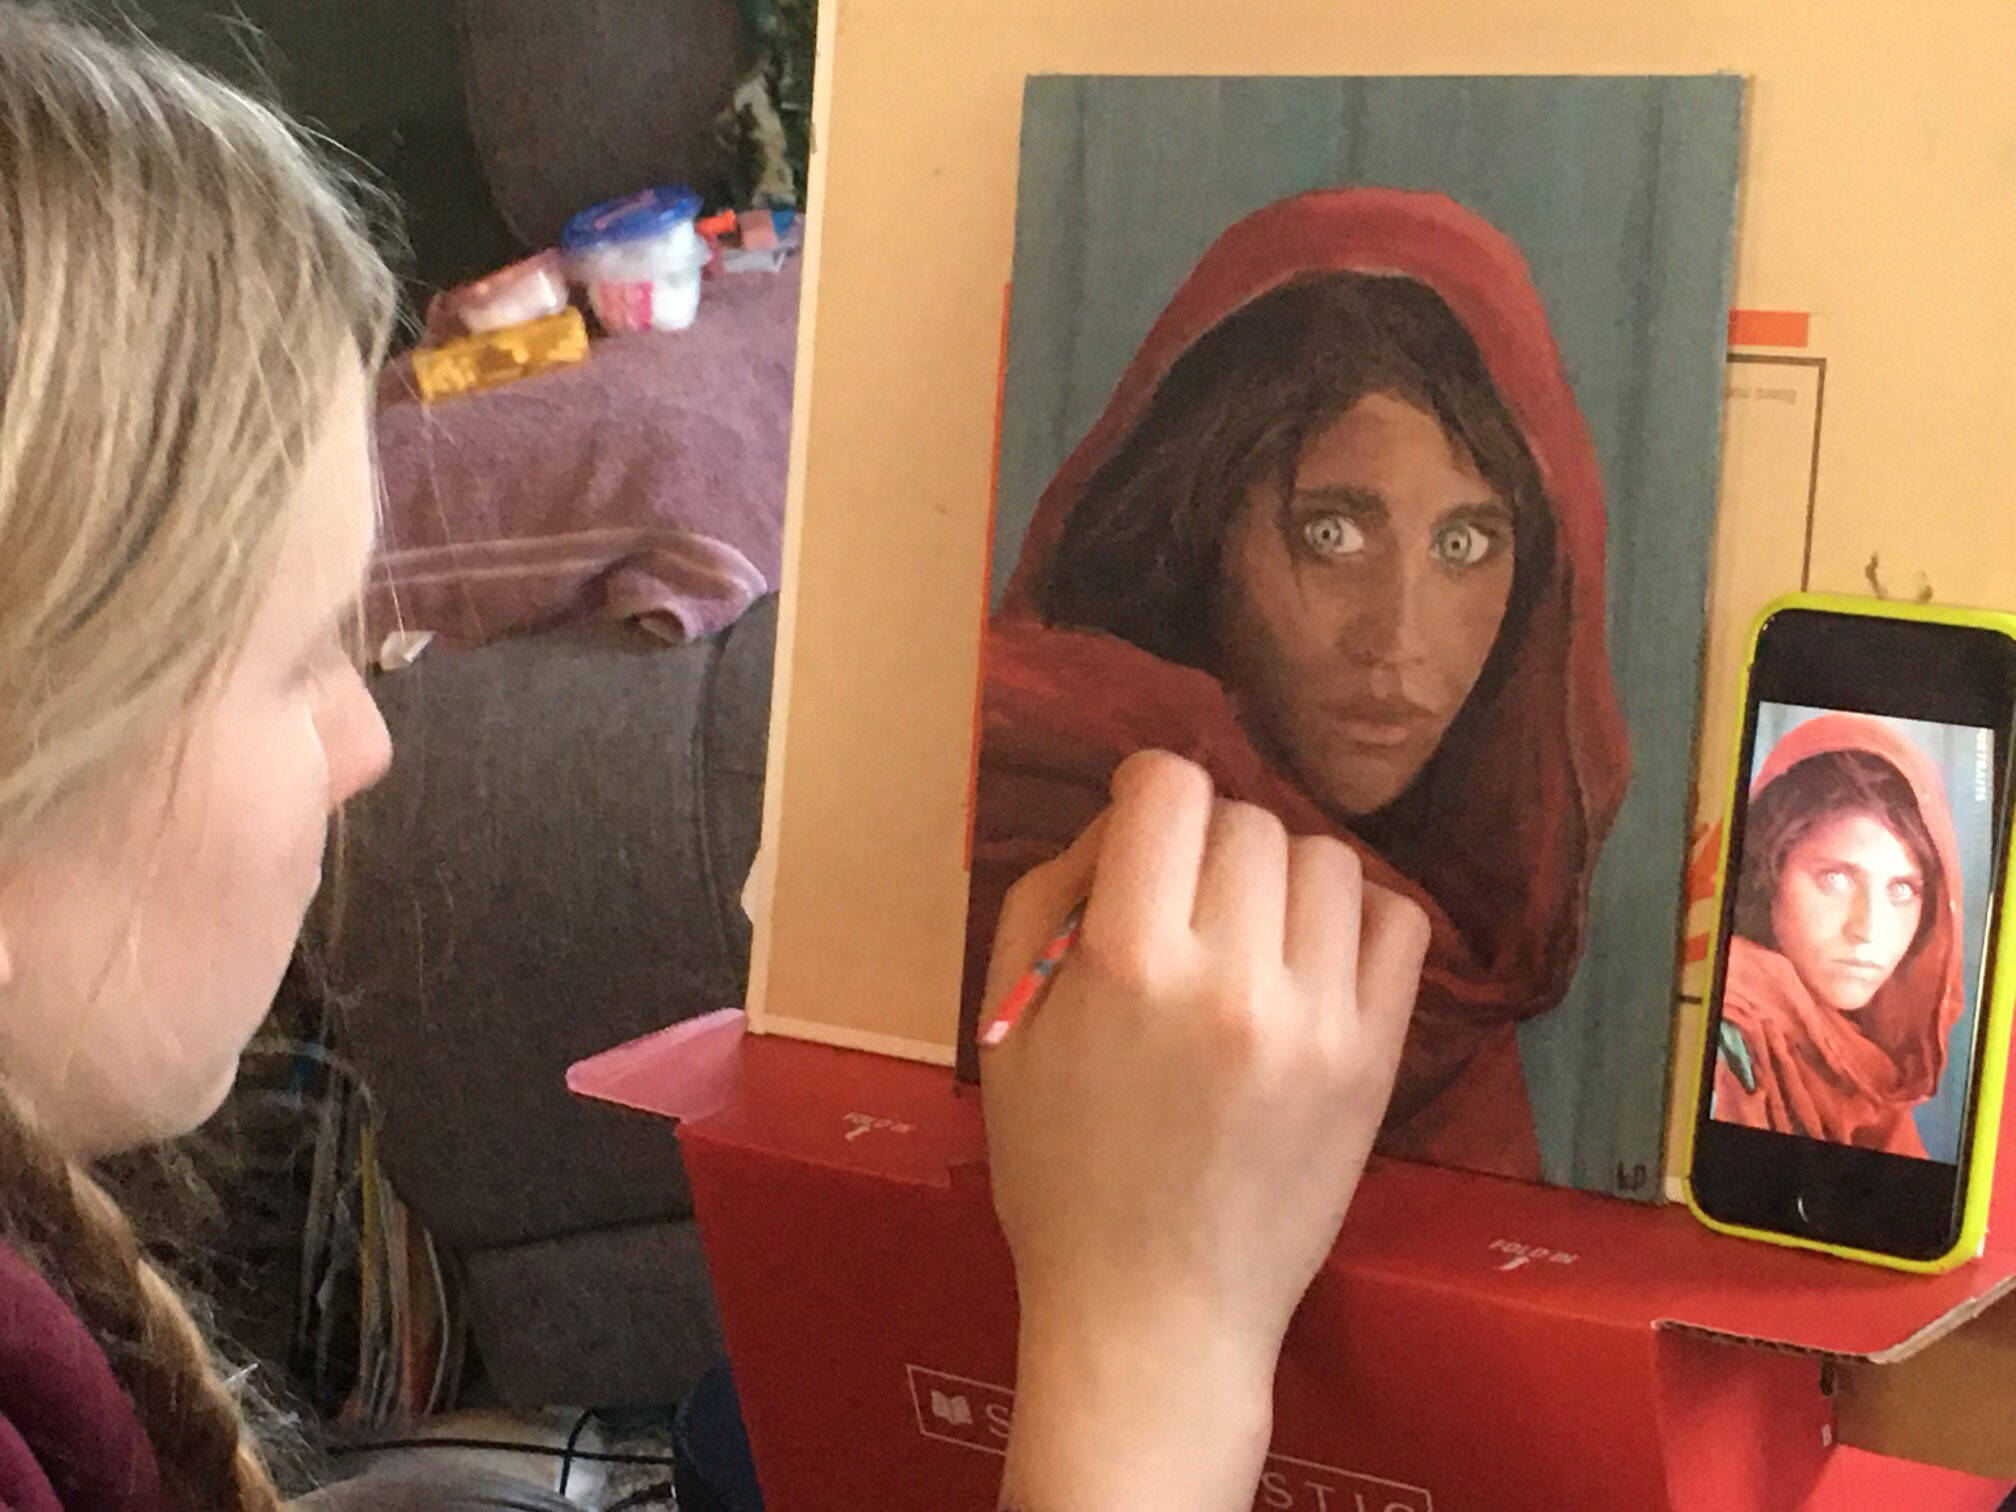 Photo provided by Leah Dunn
Homer youth artist Leah Dunn working on a painting from the famous 1984 “Afghan Girl” originally portrayed on the cover of National Geographic.